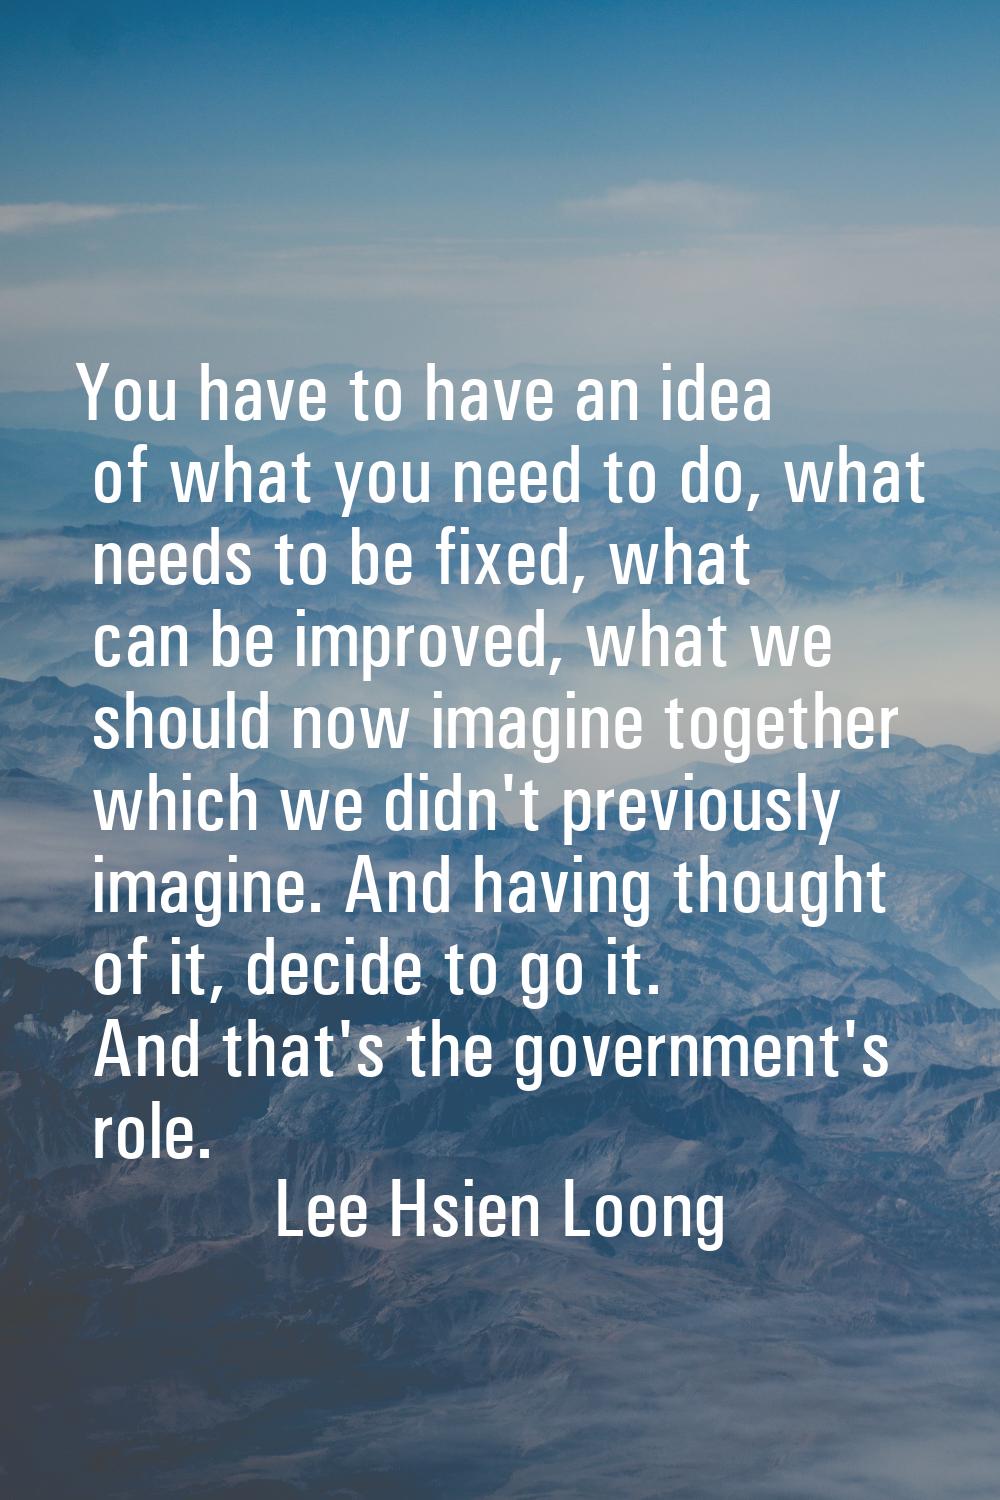 You have to have an idea of what you need to do, what needs to be fixed, what can be improved, what